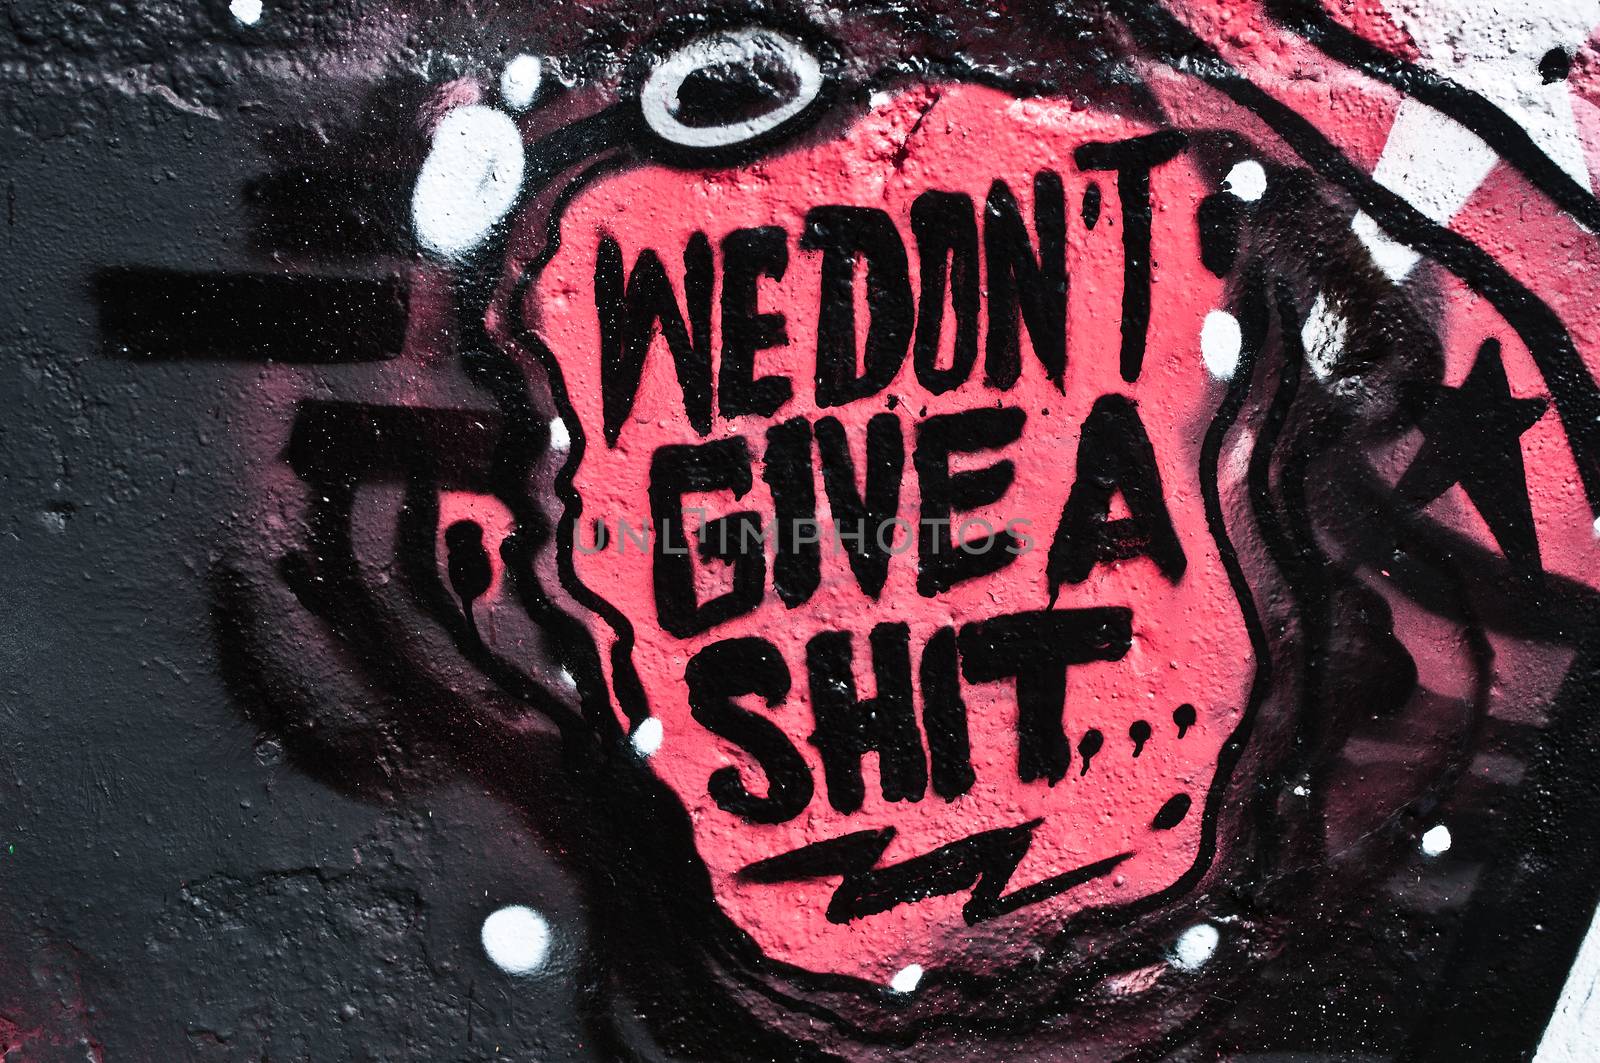 Urban Art - we don't give a shit by NeydtStock